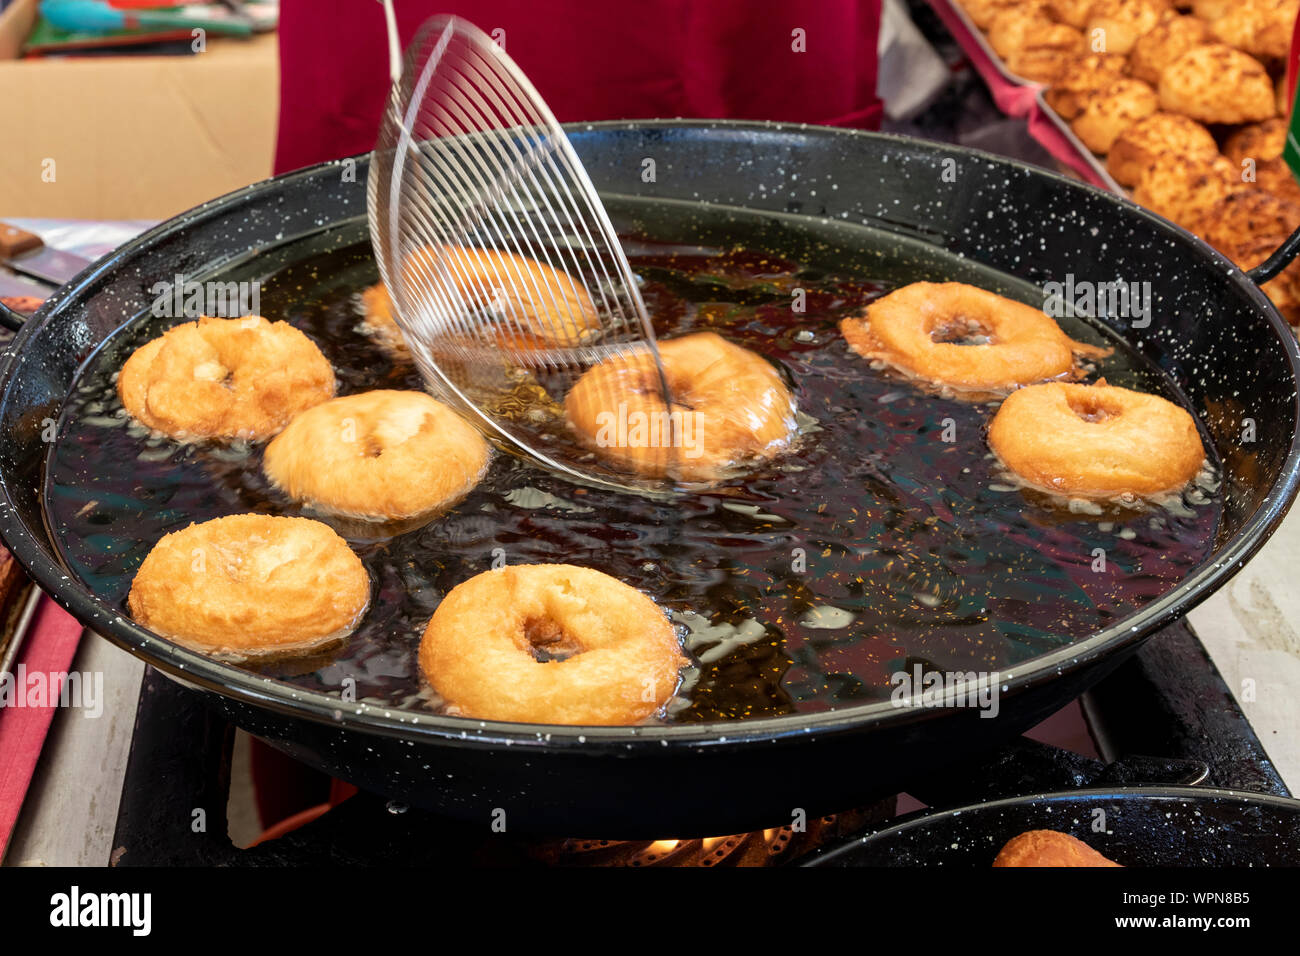 Preparation of pancake donuts, typical of Amorebieta, Biscay, Spain Stock Photo